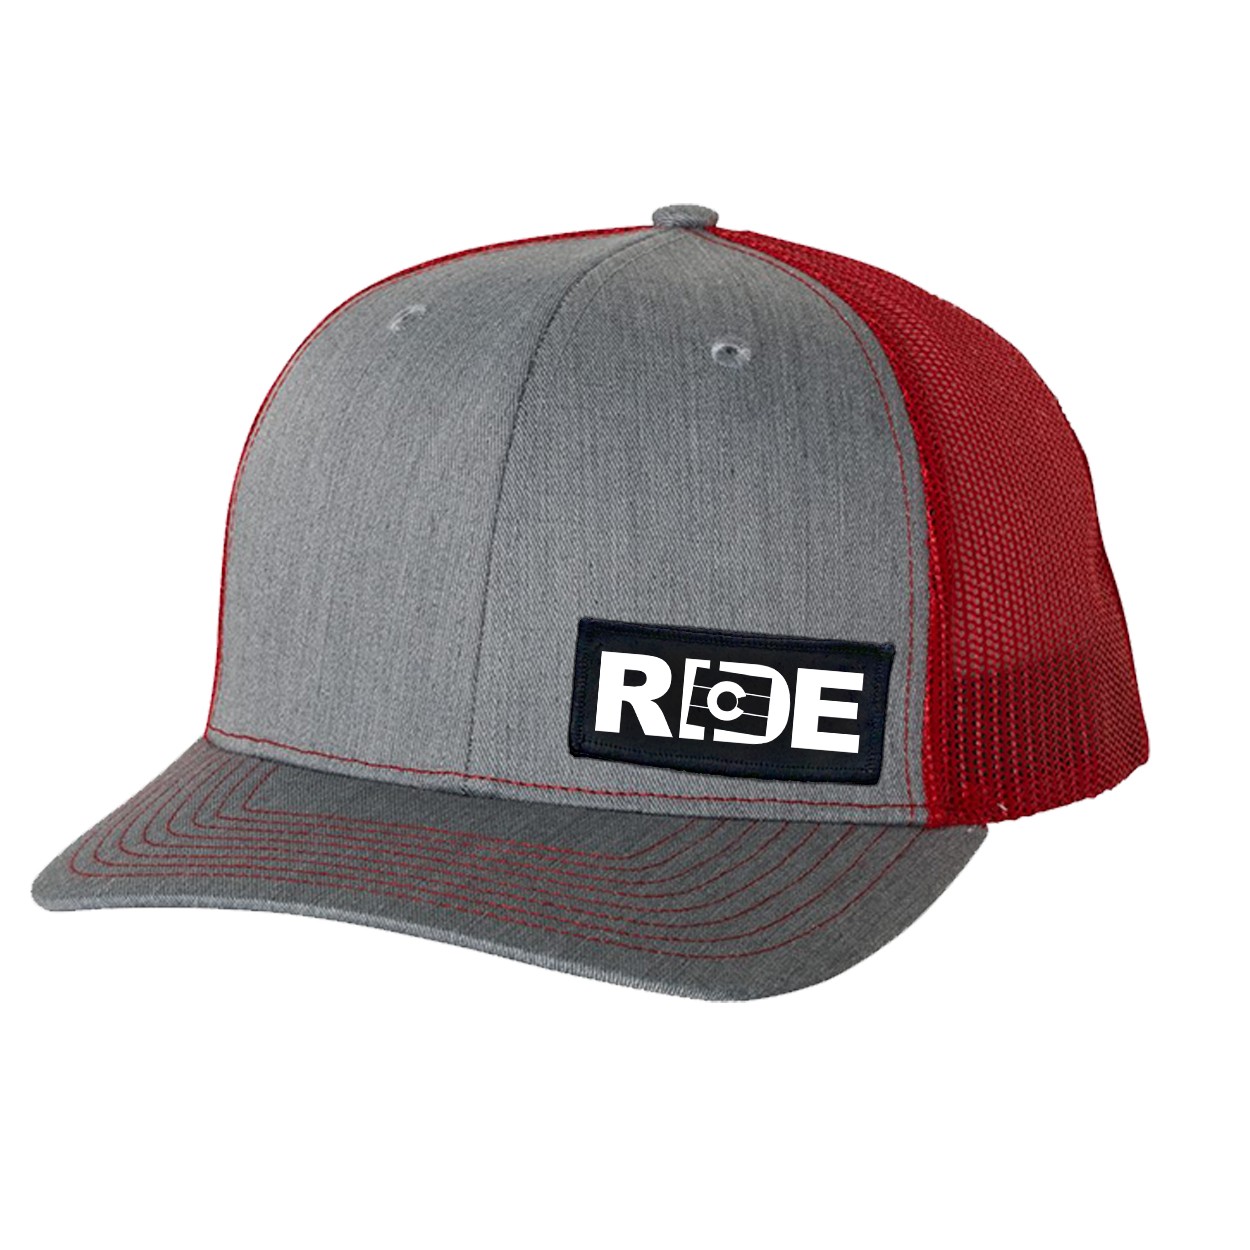 Ride Colorado Night Out Woven Patch Snapback Trucker Hat Heather Heather Grey/Red (White Logo)